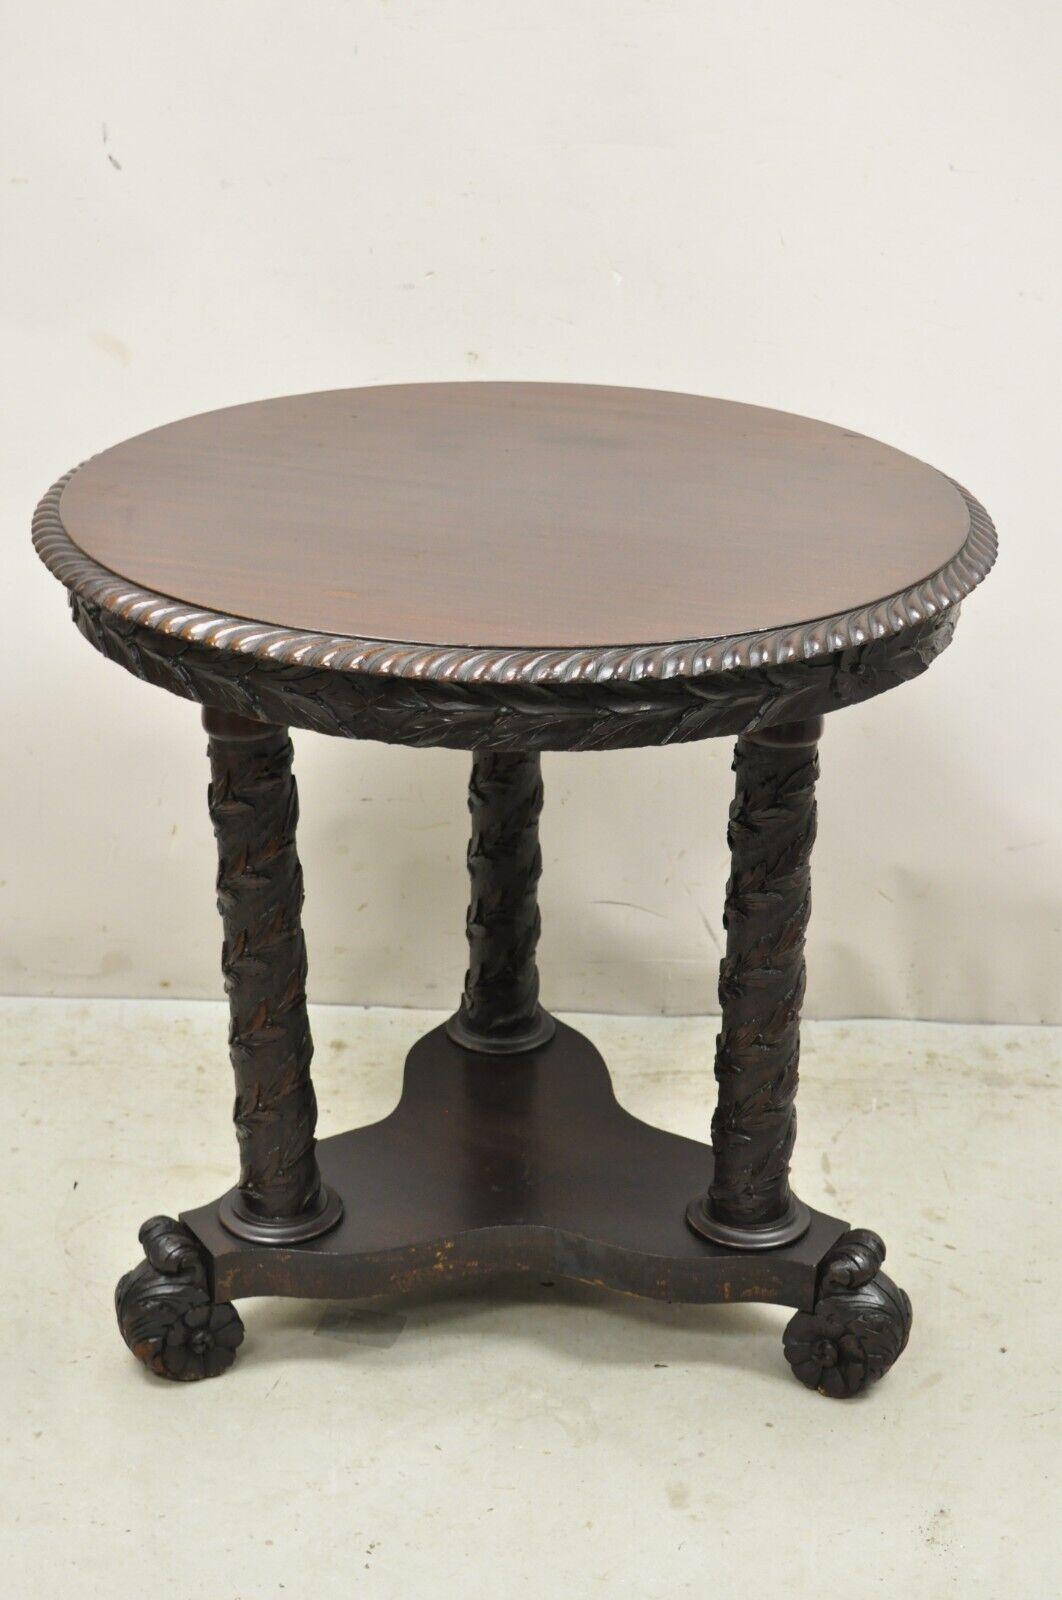 Antique American Empire Floral Spiral Carved Mahogany Round Library Center Table For Sale 3